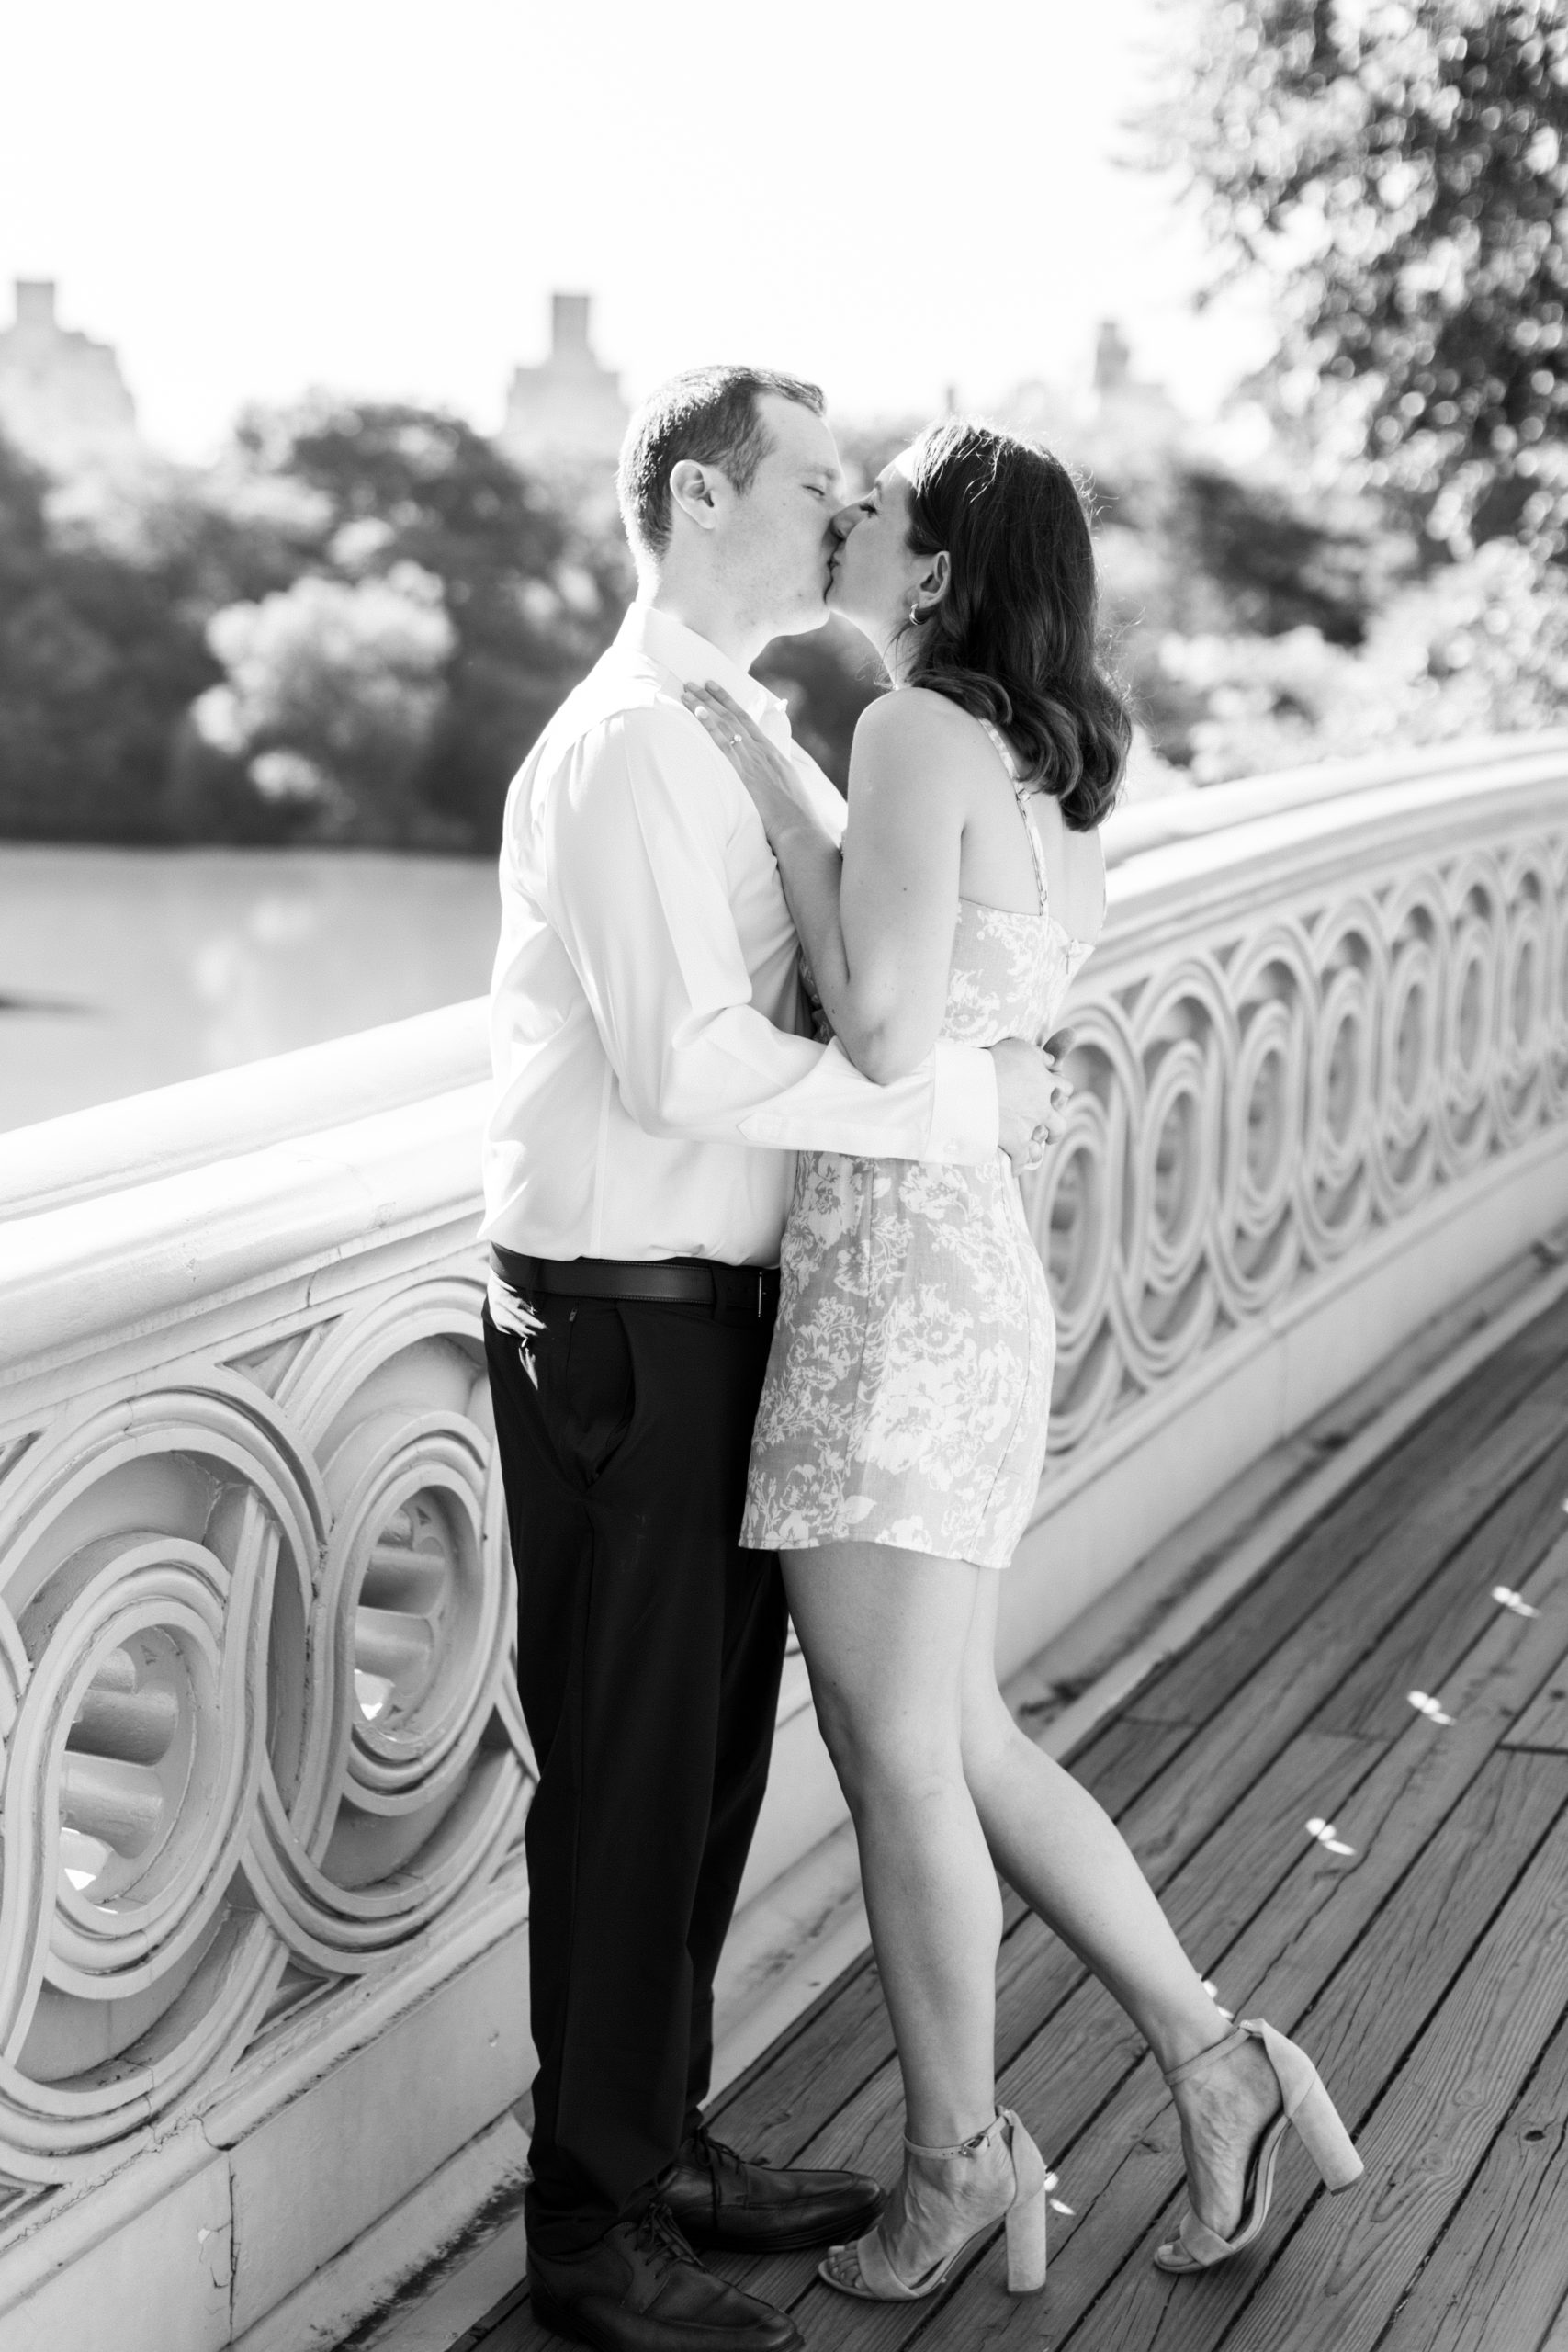 Couple embrace and kiss on wooden bridge in the park for Central Park Engagement Photos